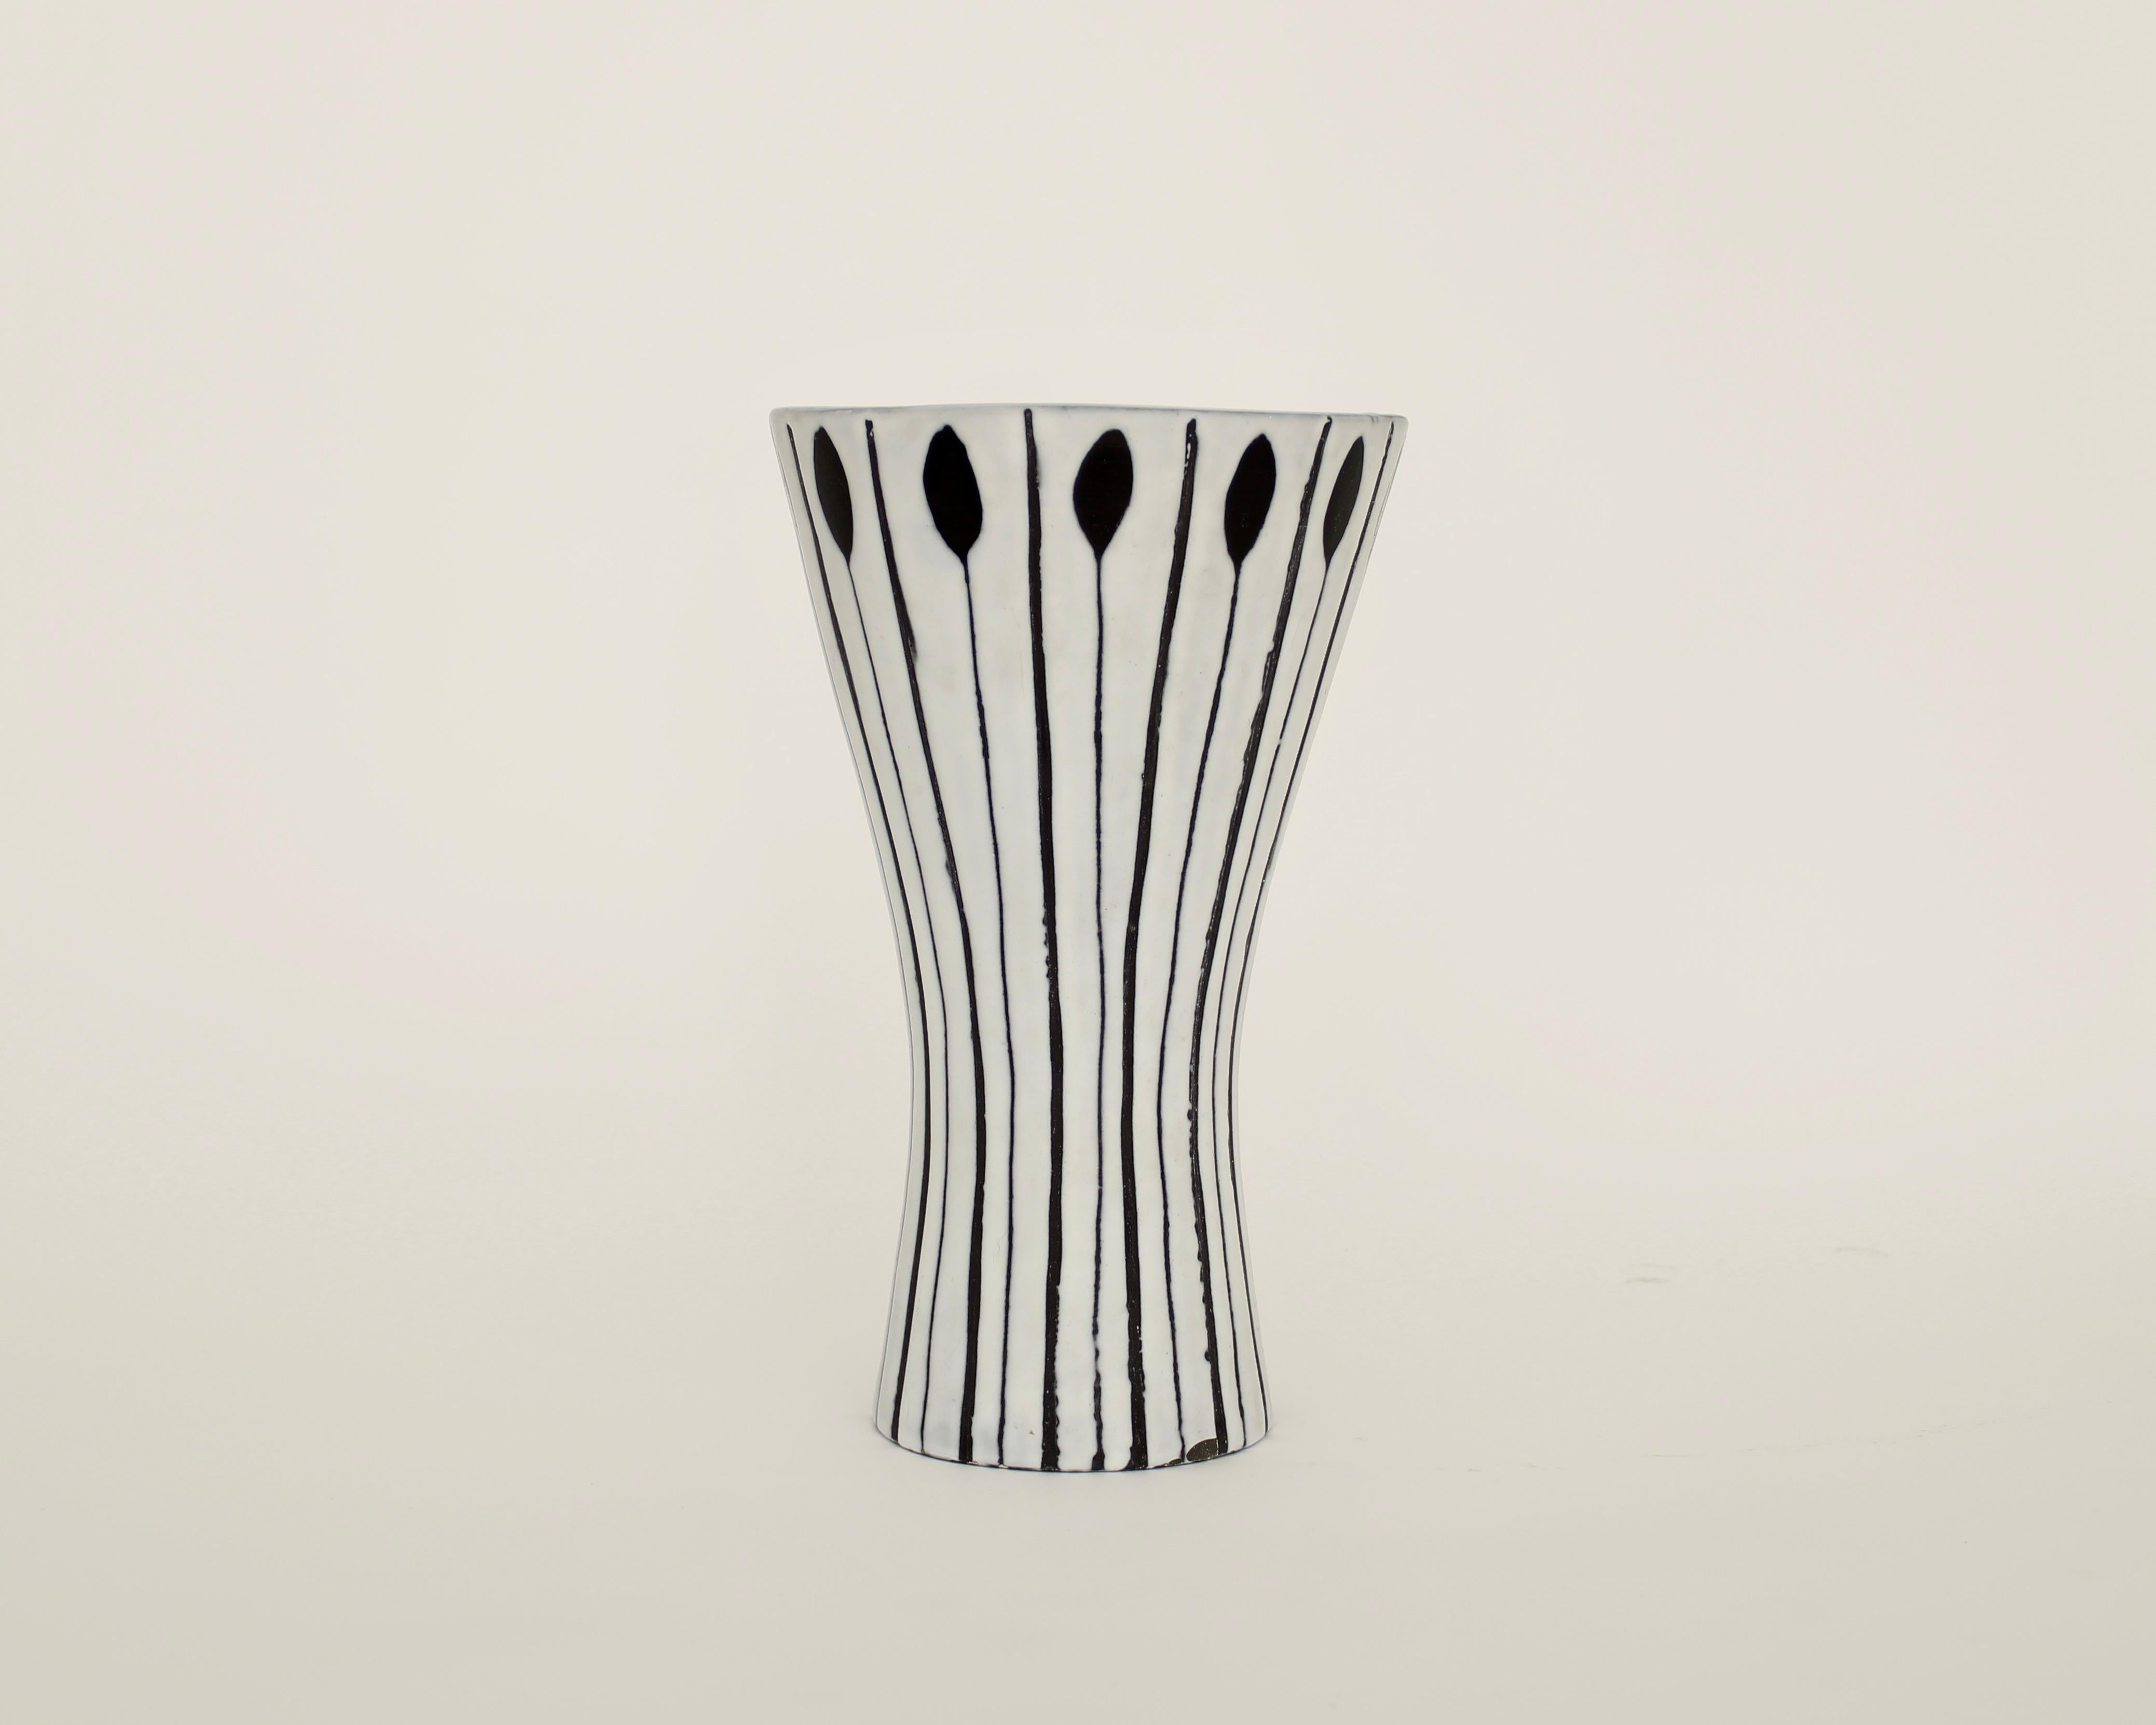 French master ceramic artist Roger Capron ceramic white and black vase with the motif of lances or arrows. Vases with this motif were executed circa 1957 and are pictured in the book on p 68 “Roger Capron Ceramiste”.
Measures: 12.5” height x 7.5”